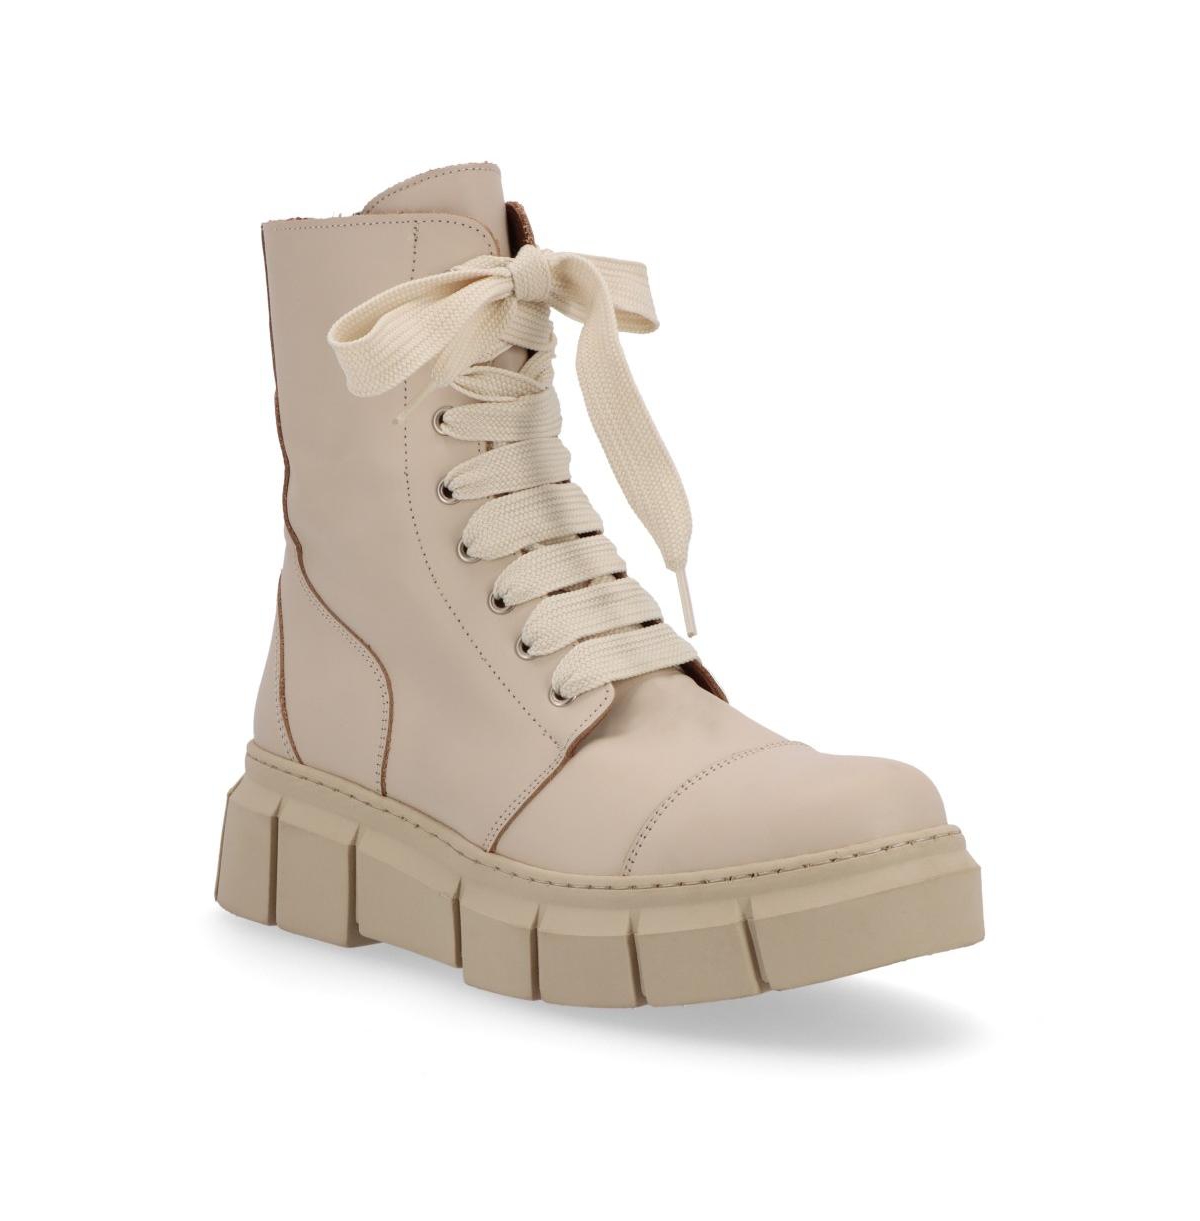 Women's Can Can Leather Ankle Boots - Cream